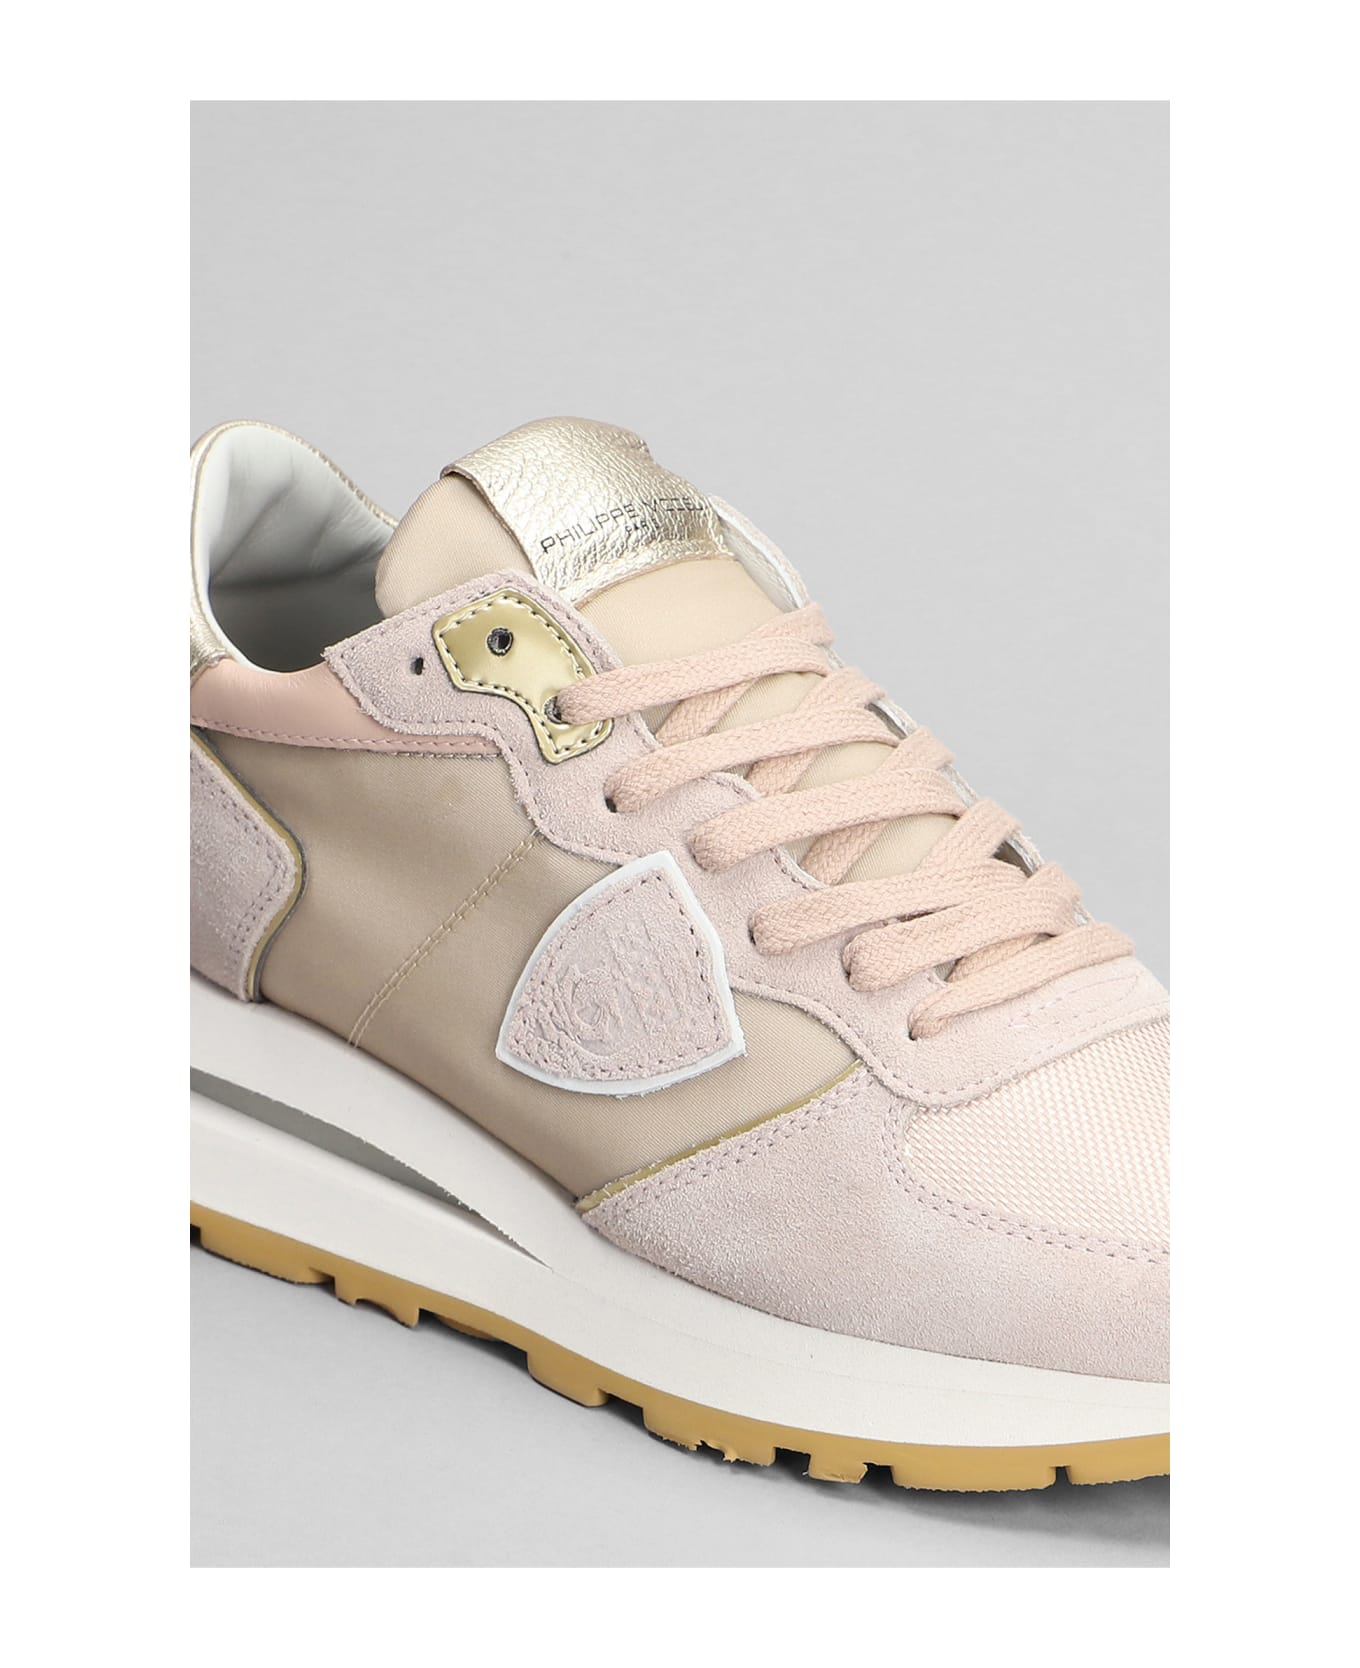 Philippe Model Tropez Haute Low Sneakers In Rose-pink Suede And Fabric - rose-pink スニーカー